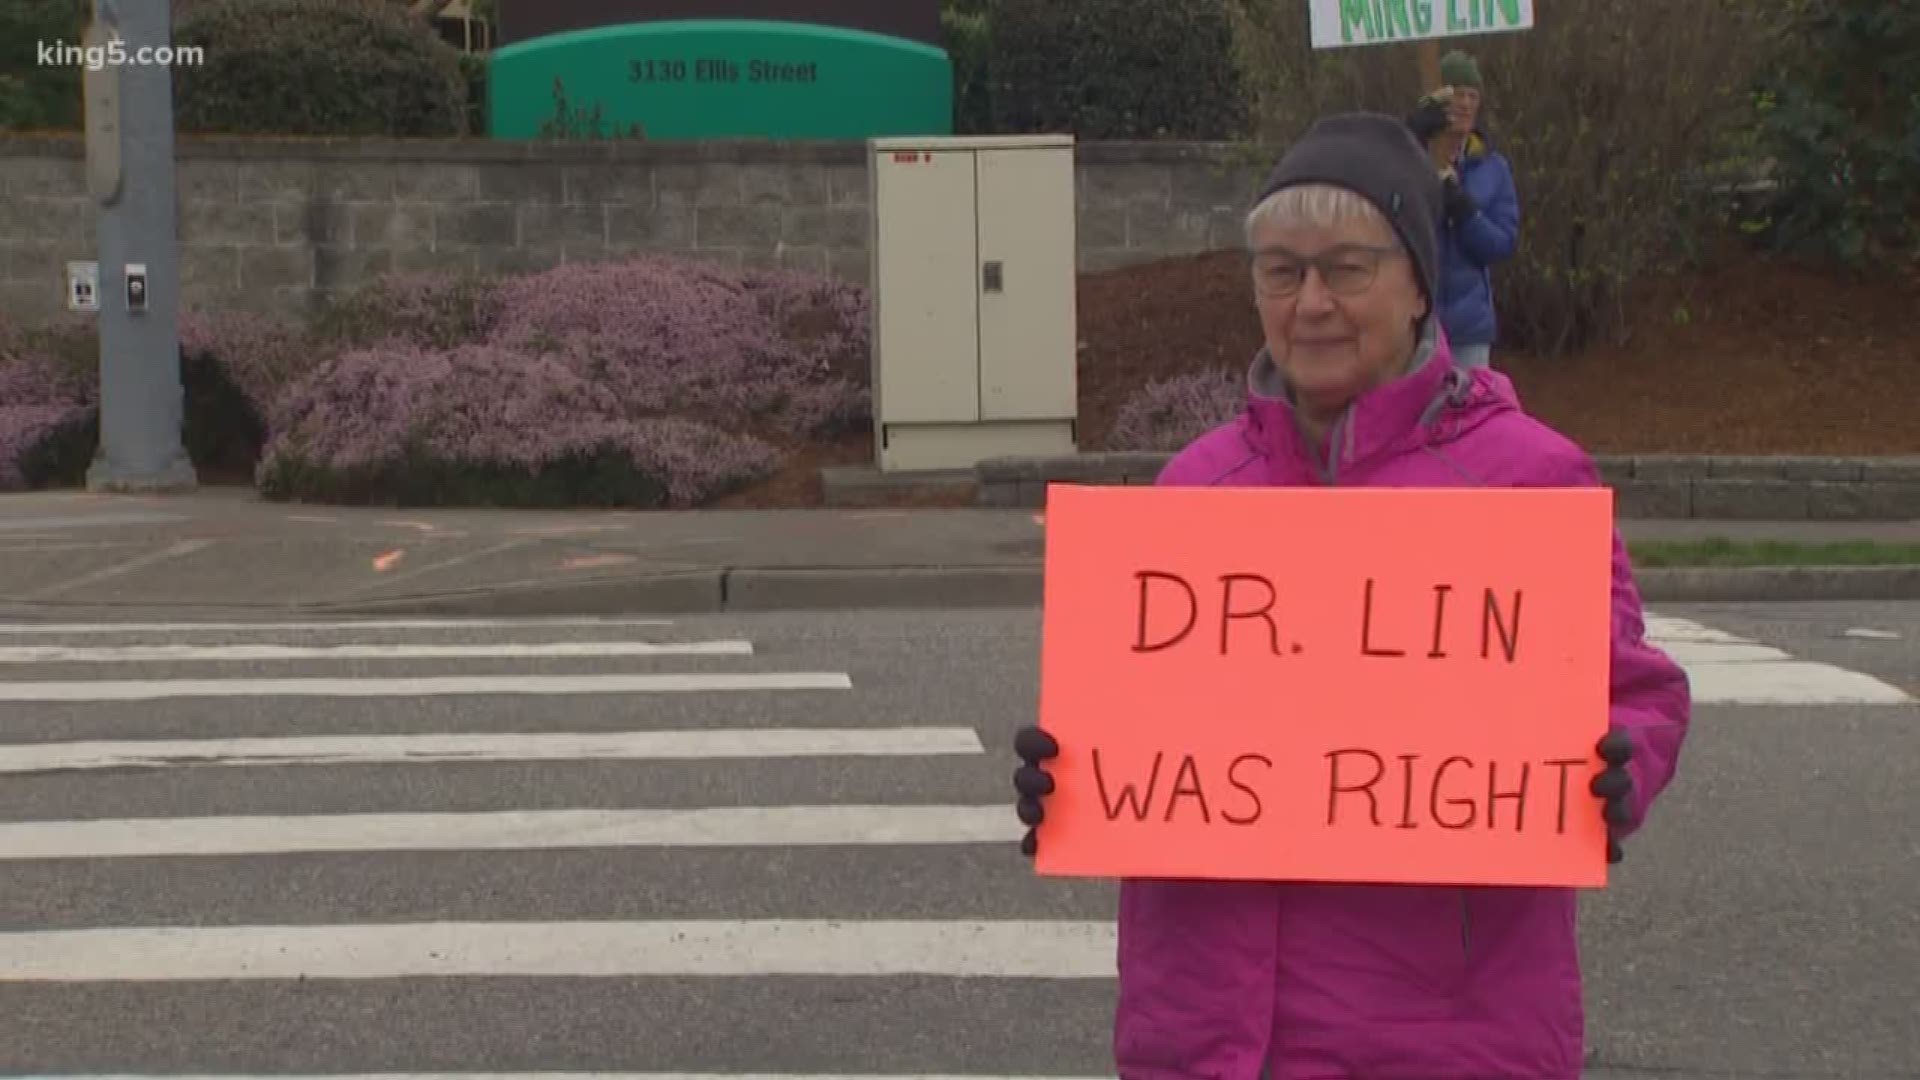 Dr. Ming Lin, an ER doctor in Bellingham, claims he was fired for criticizing what he saw as a sluggish response to coronavirus by the hospital's administration.